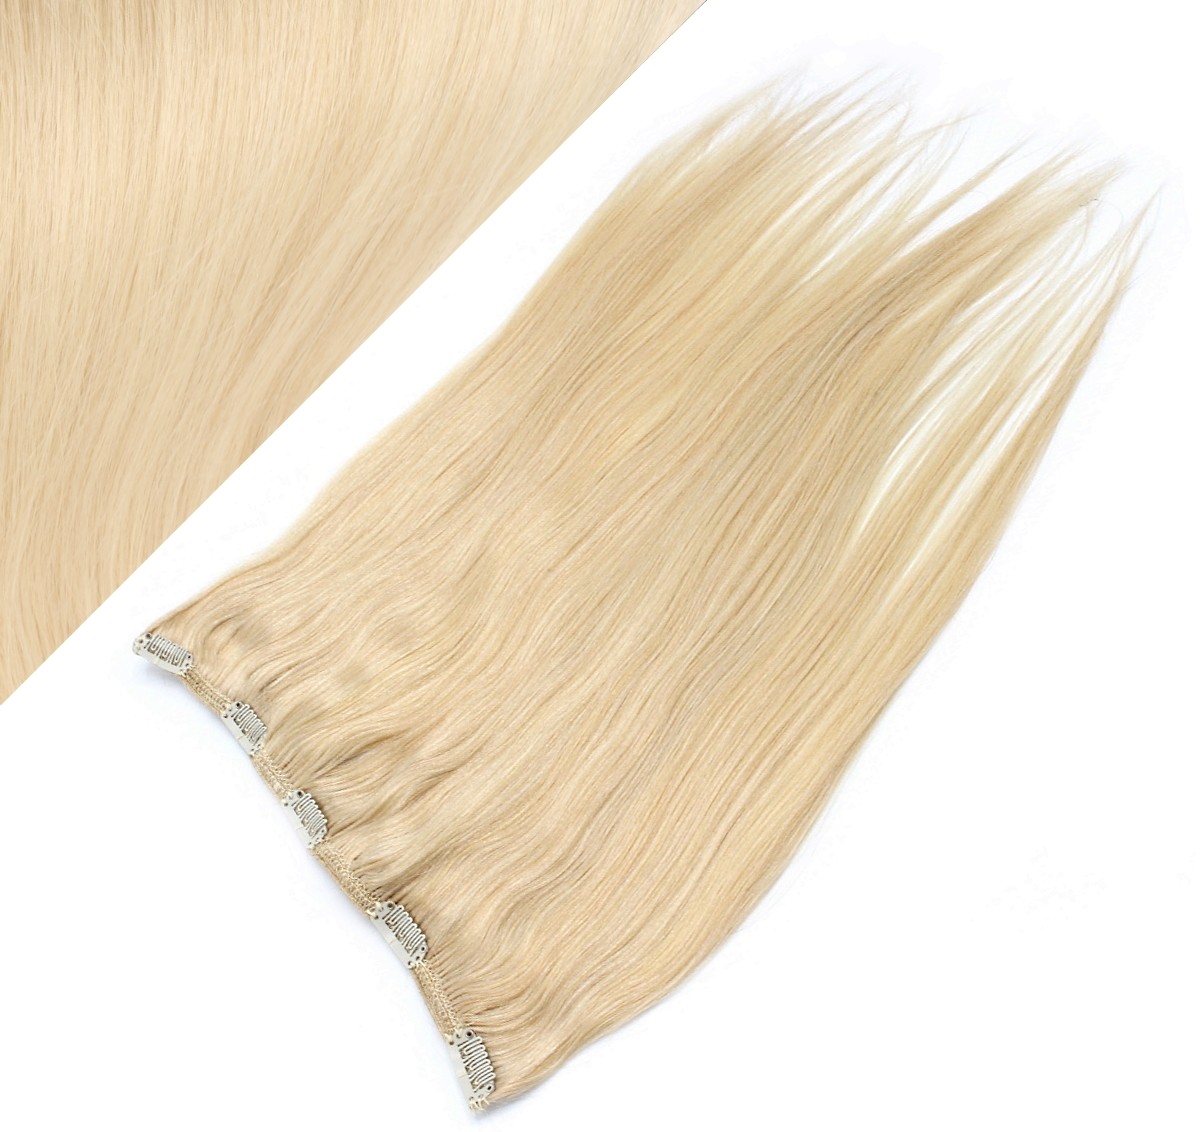 16˝ One Piece Full Head Clip In Hair Weft Extension Straight The Lightest Blonde Clip Hair